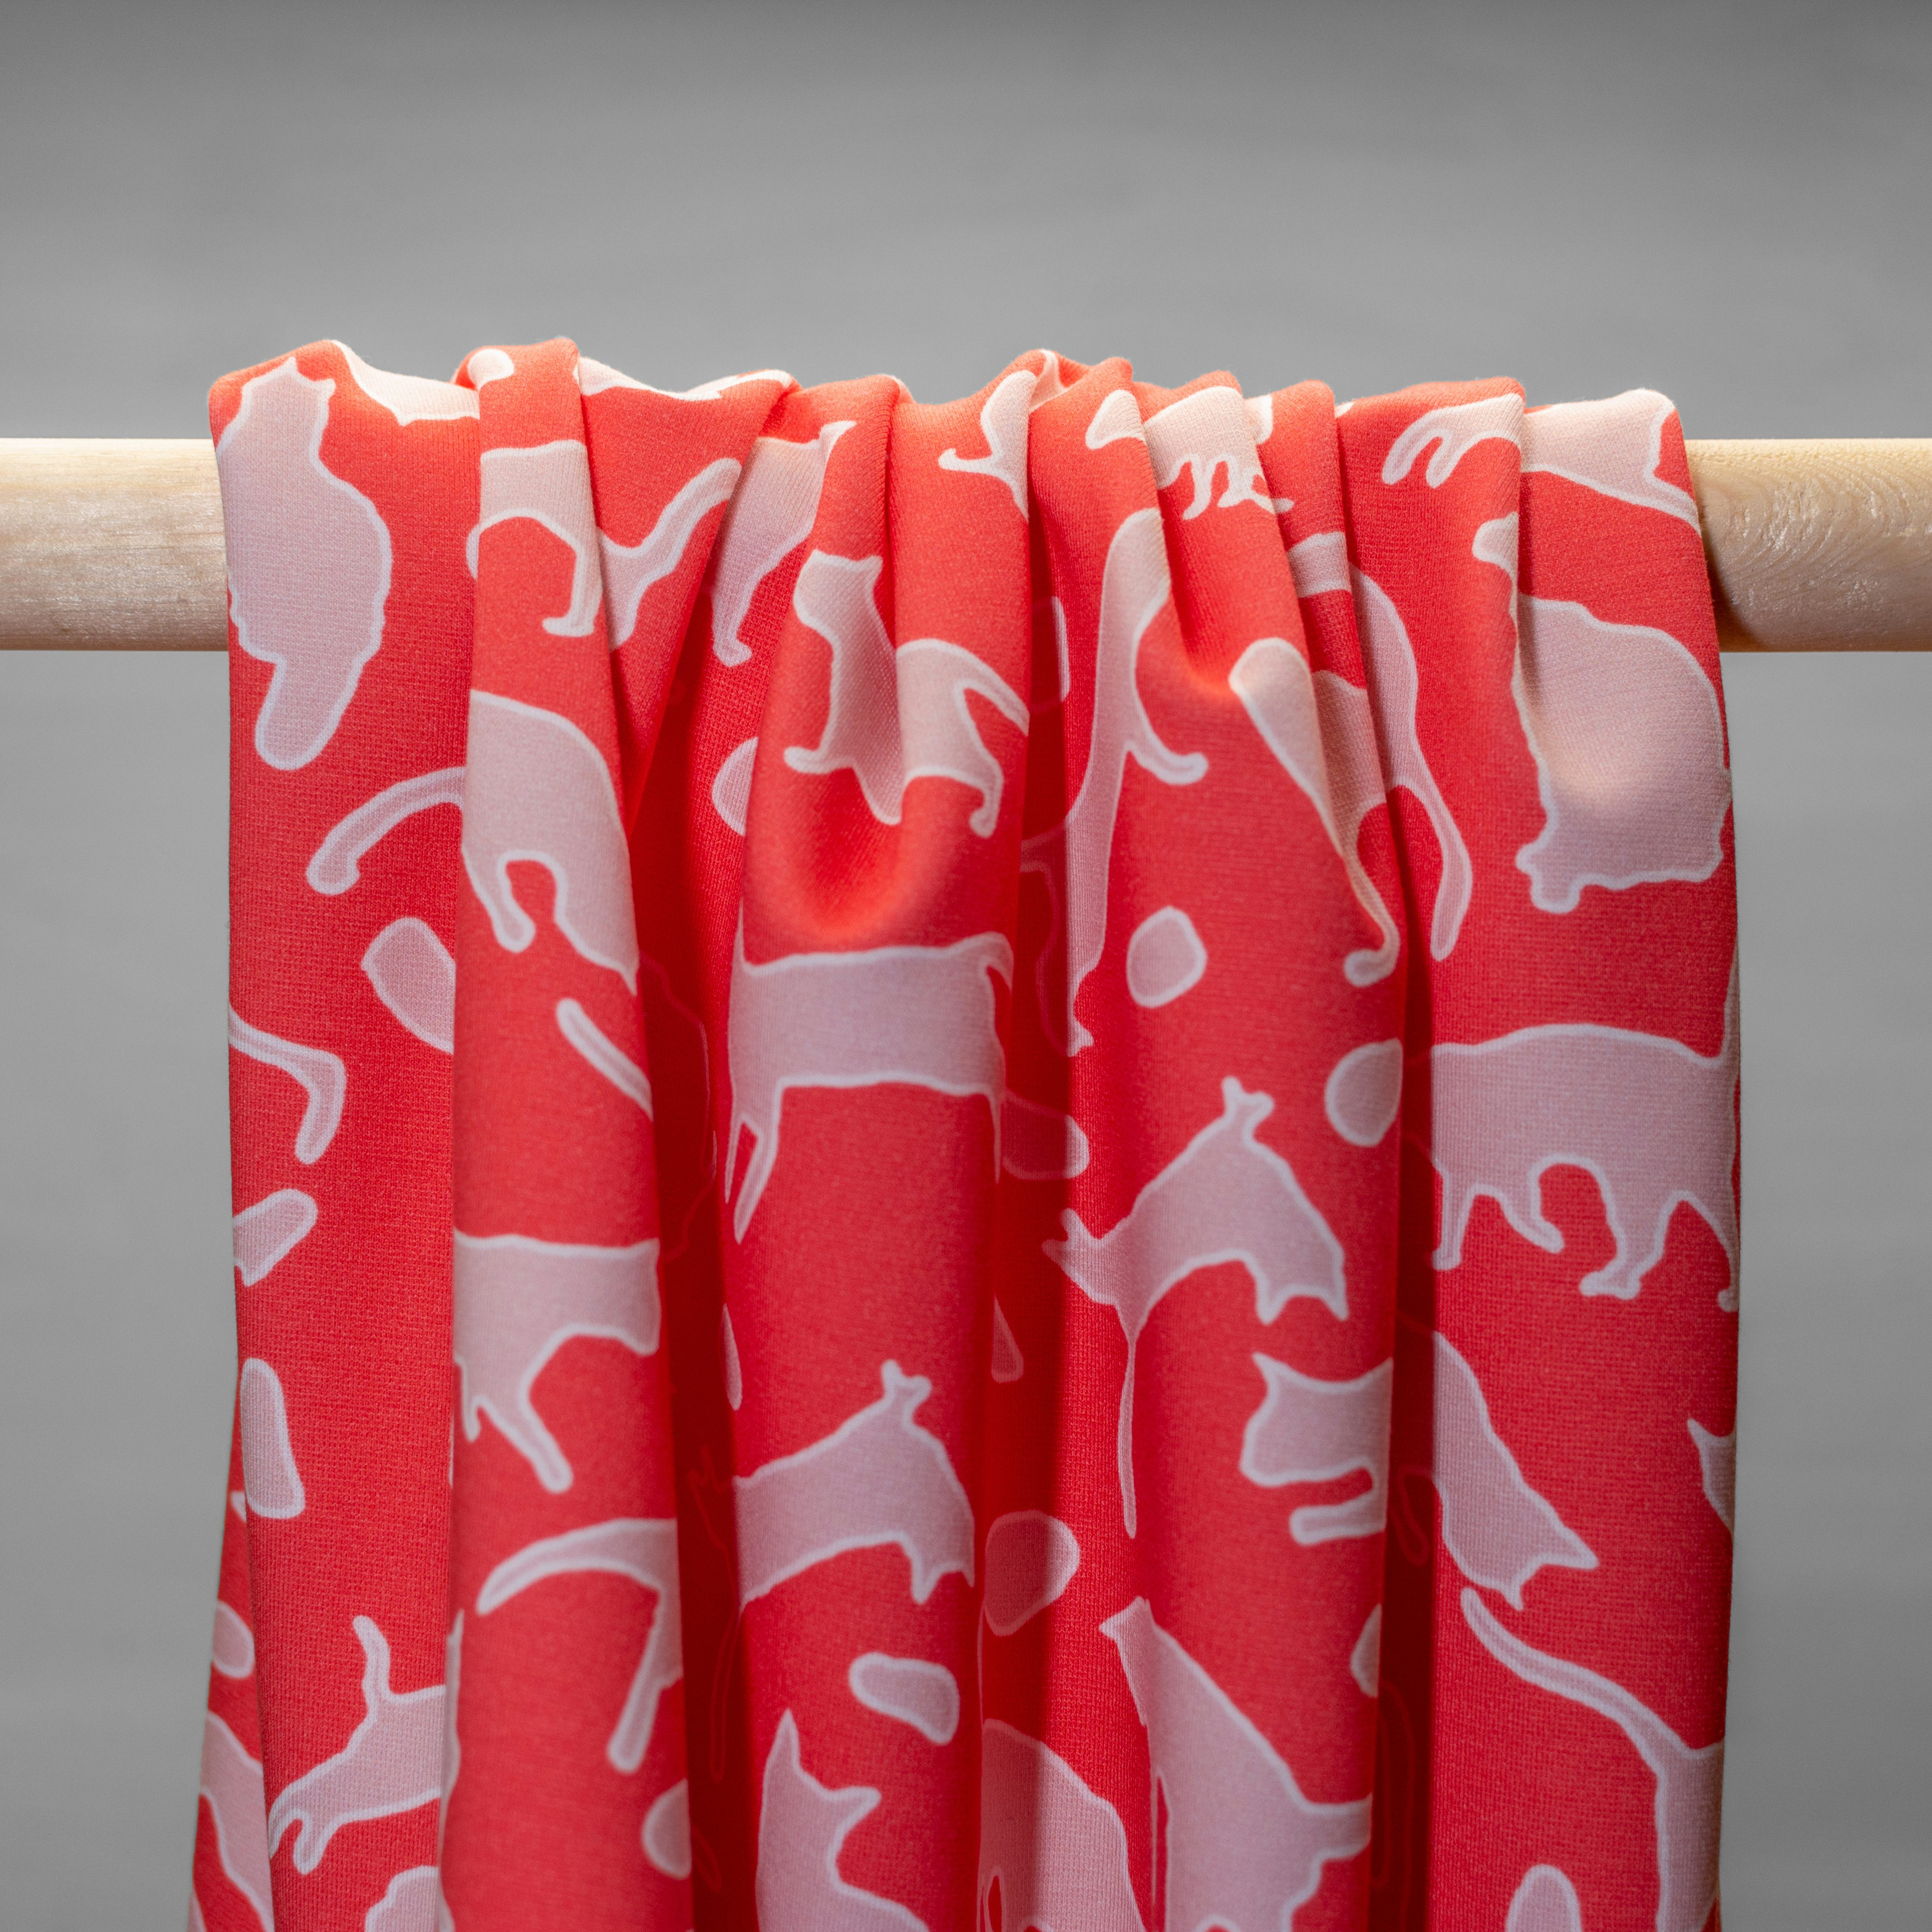 Jersey in pink cat print hanging in folds.